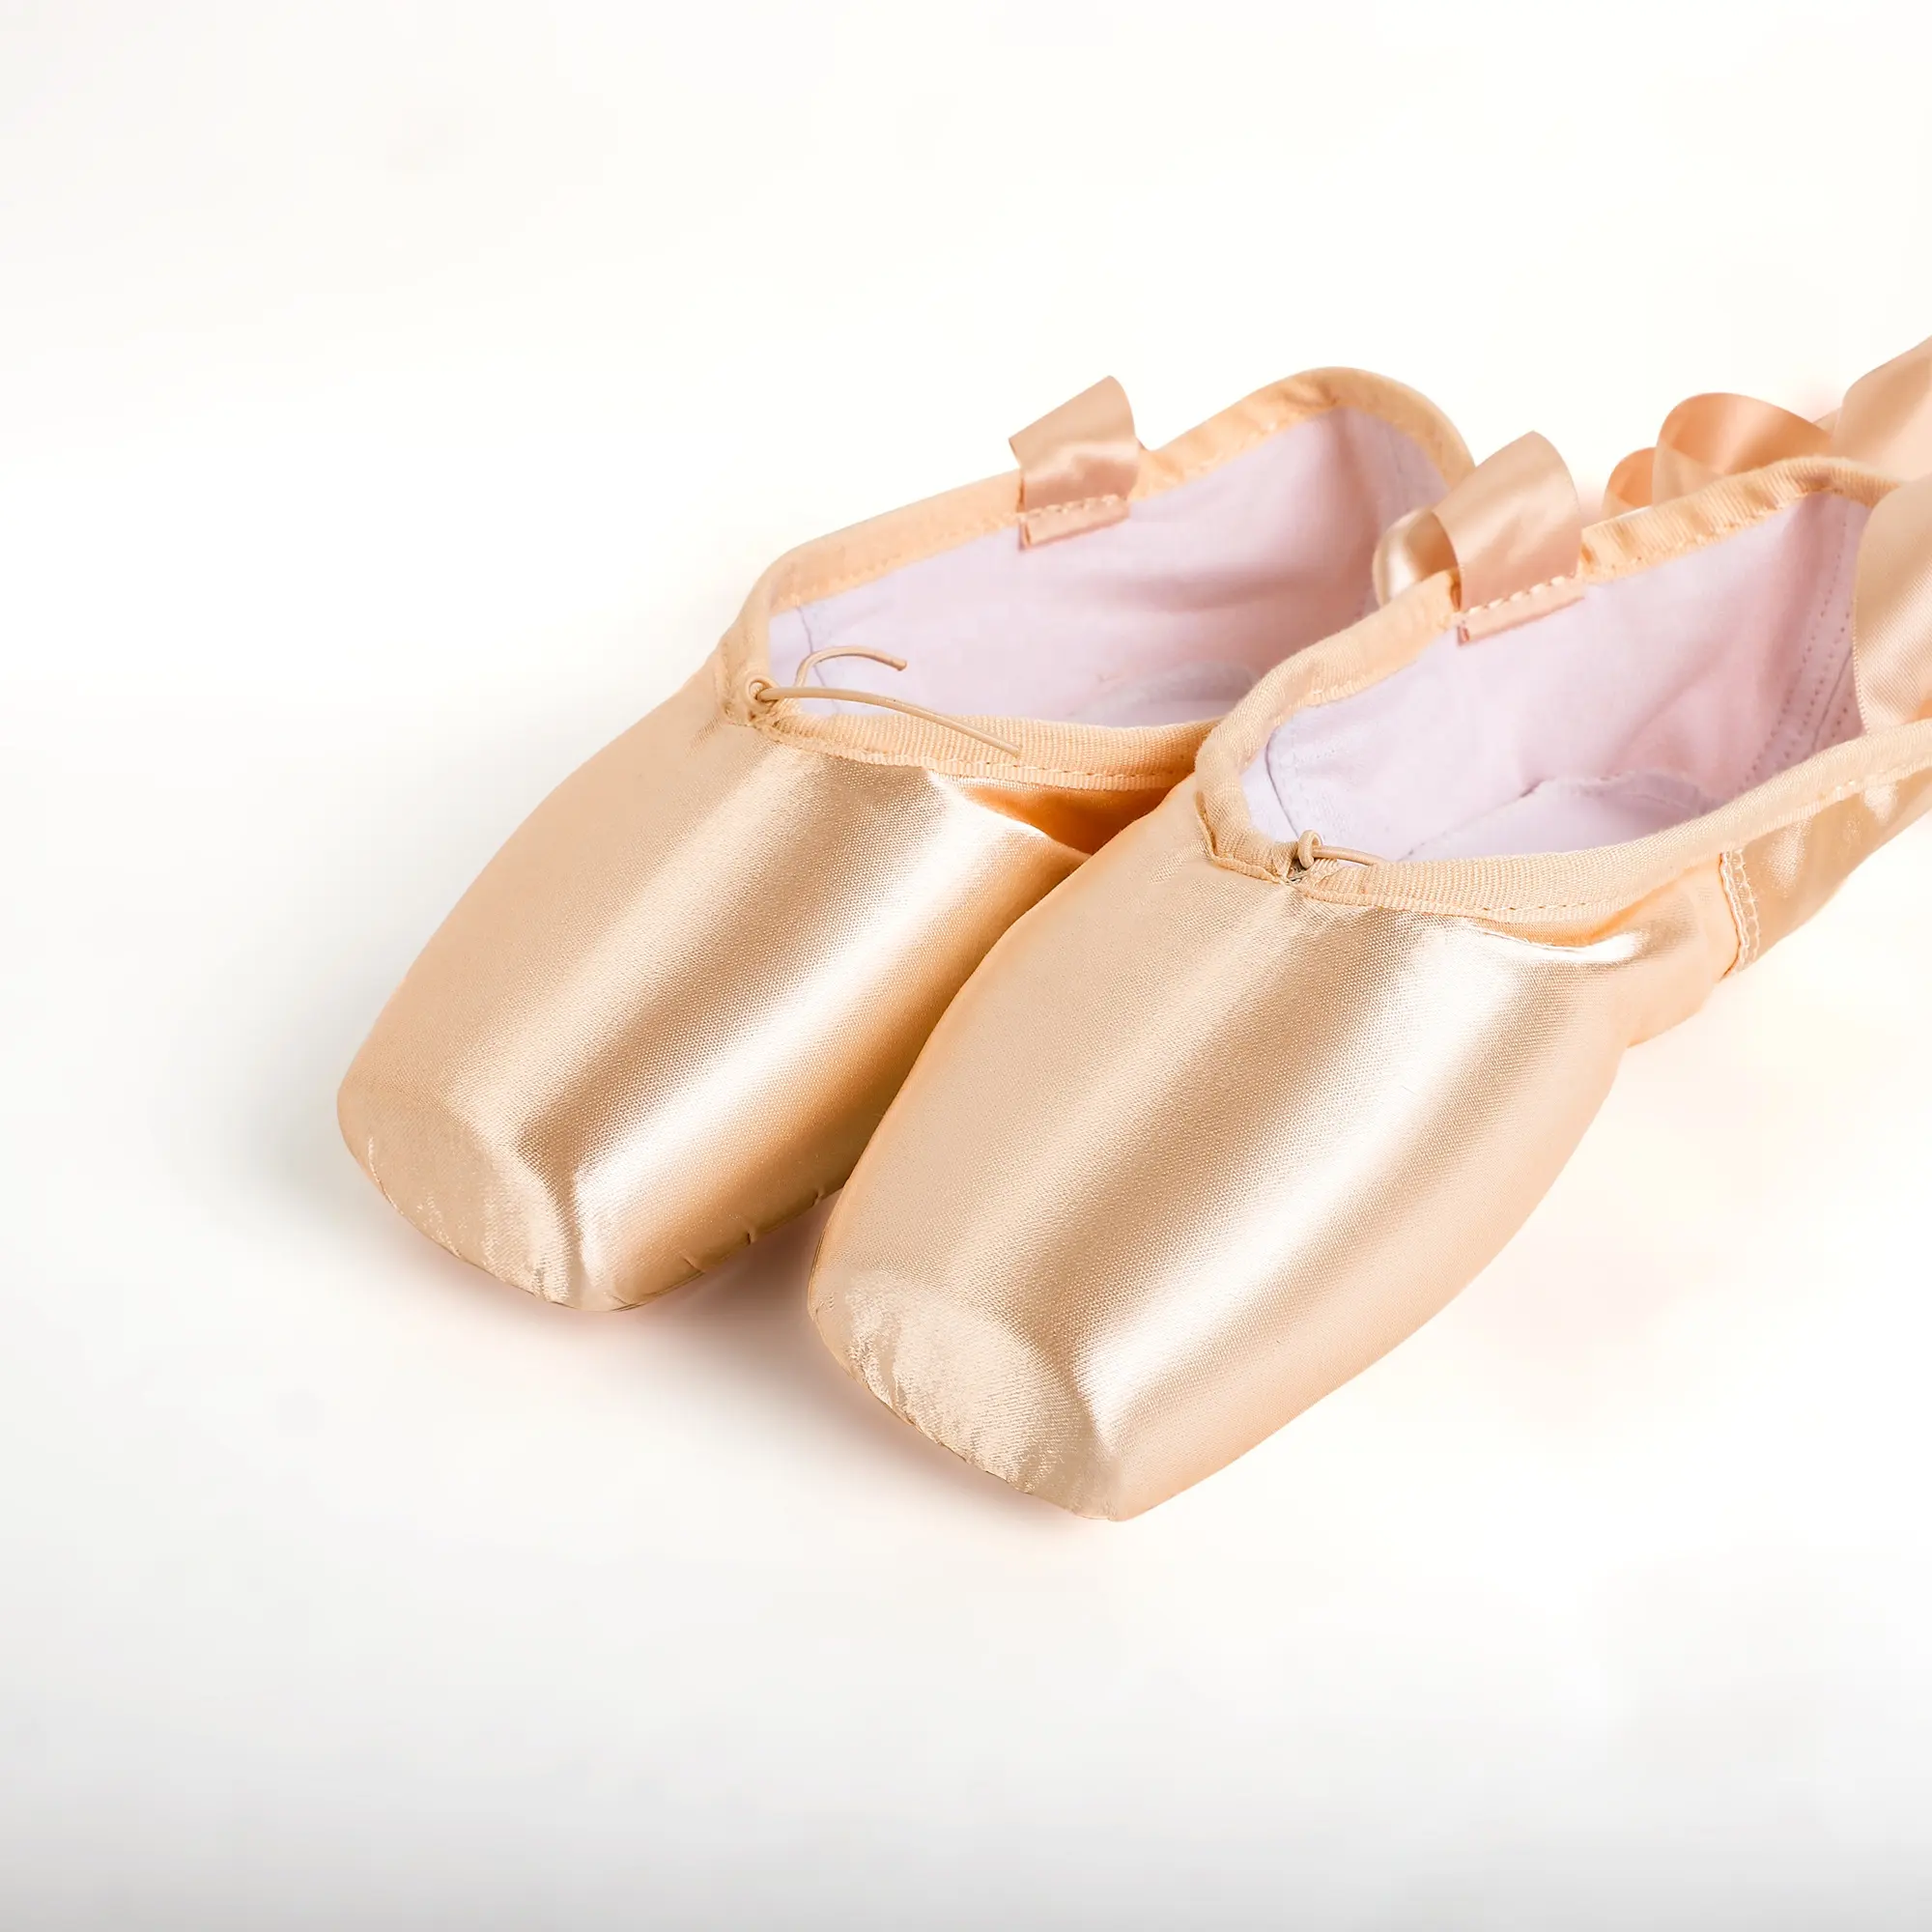 EU and US in Stock Changzhou Wholesale Dance Shoes Ballet Pointe Shoes for Women and Girls